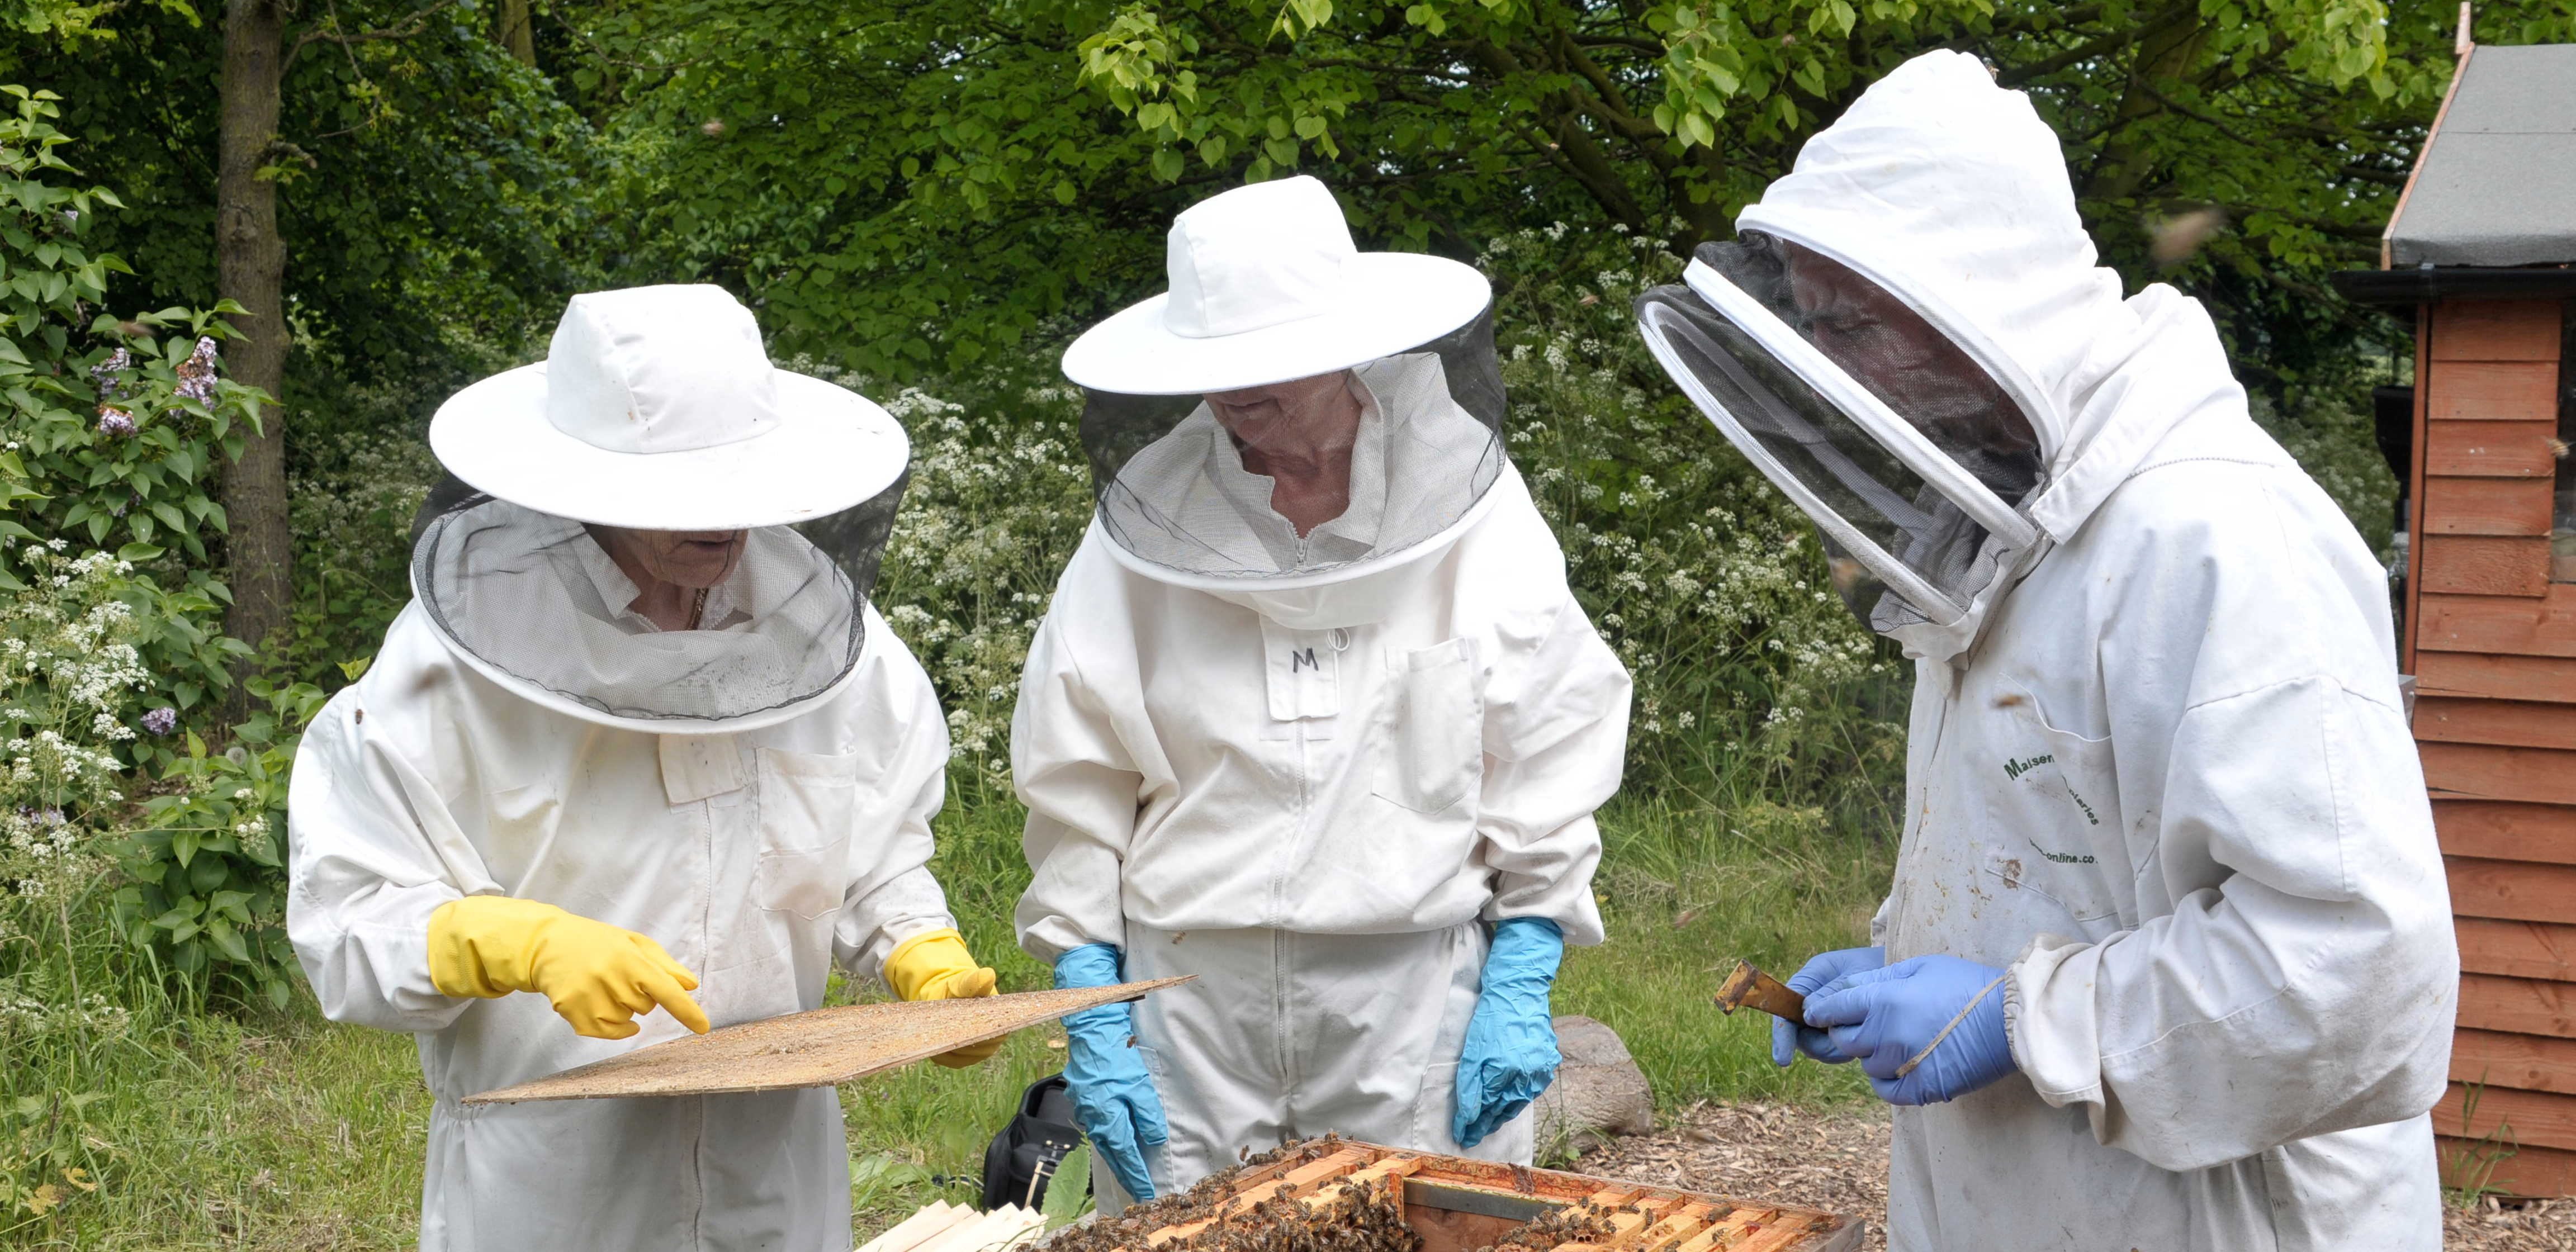 3 people are in bee keeper outfits and inspect the bee hives